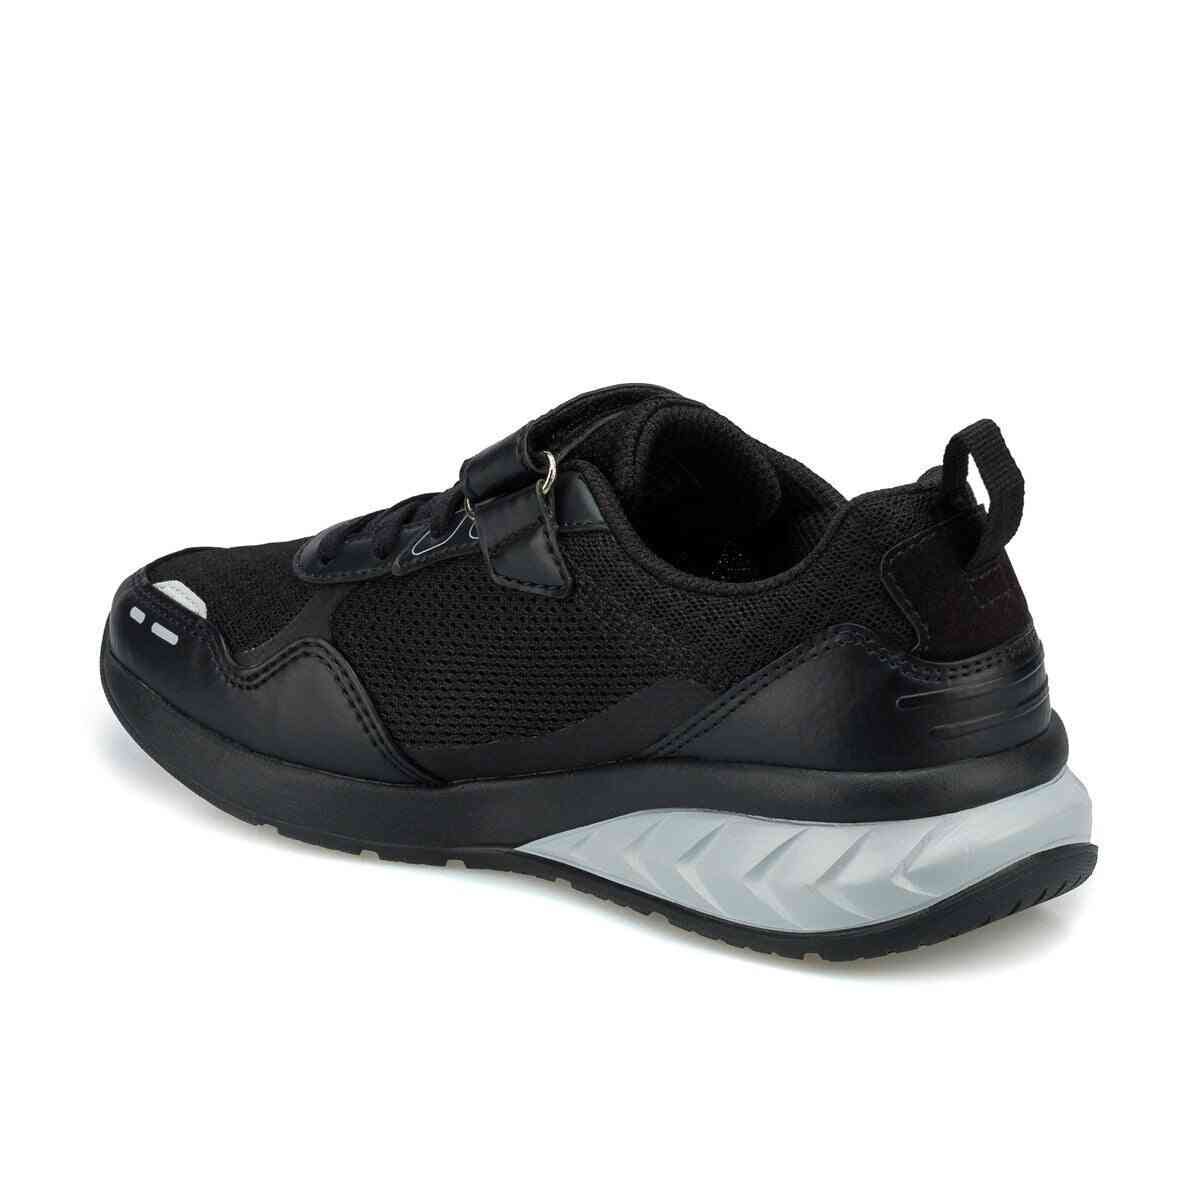 Male Child Hiking Shoes